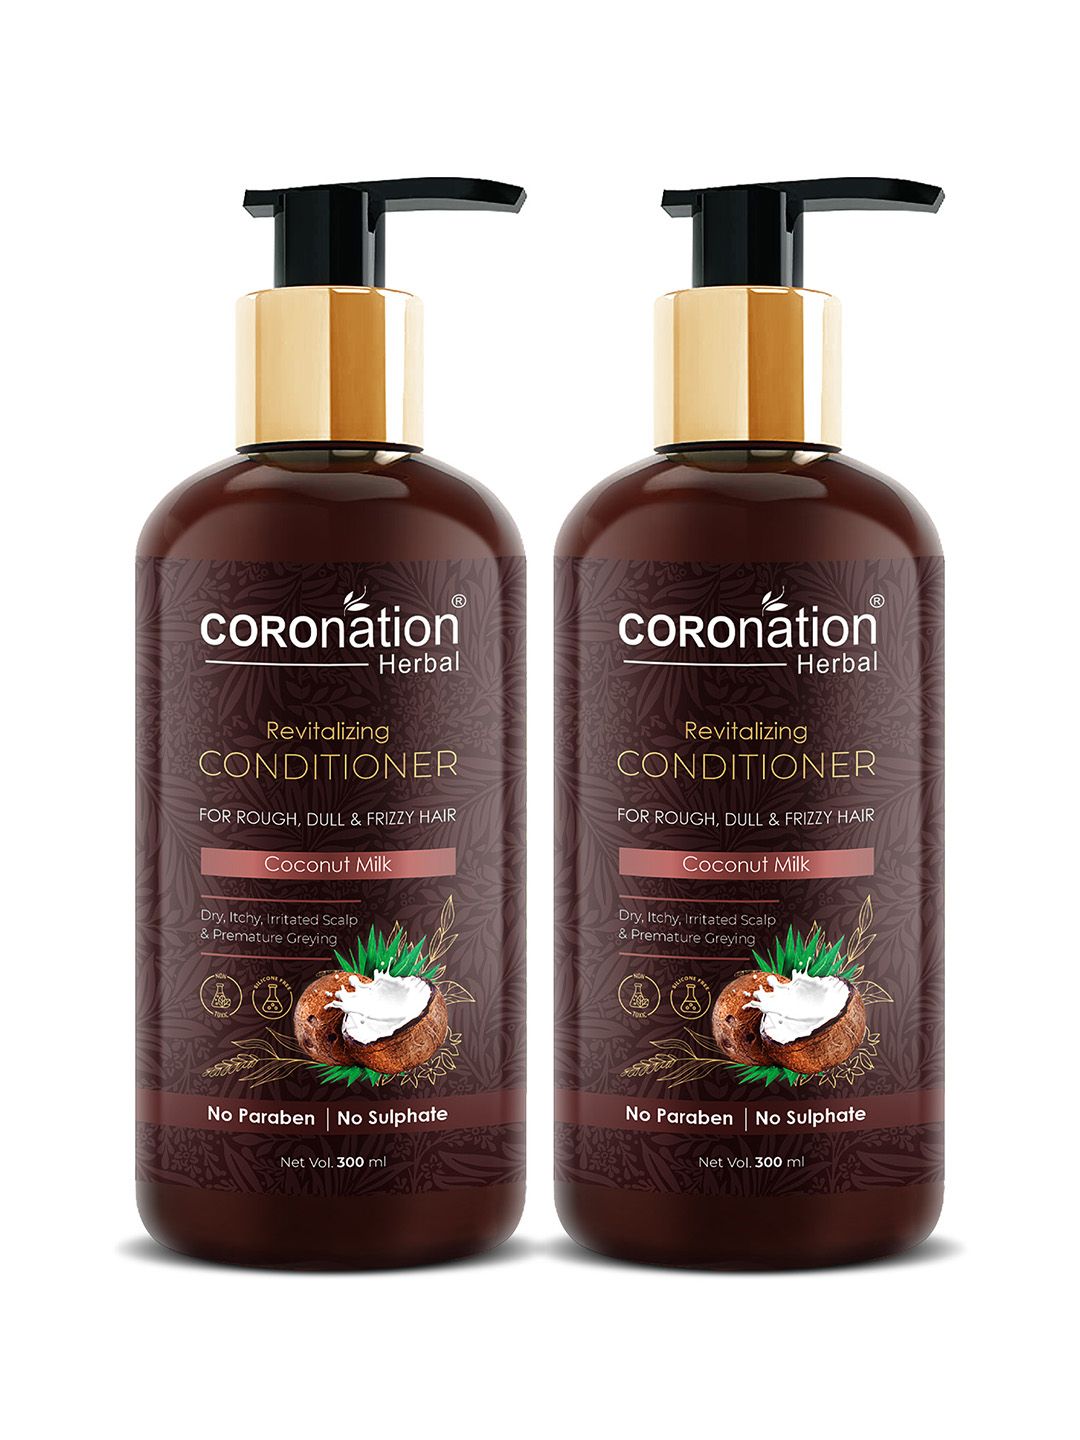 COROnation Herbal Set Of 2 Revitalizing Conditioner with Coconut Milk 300 ml each Price in India